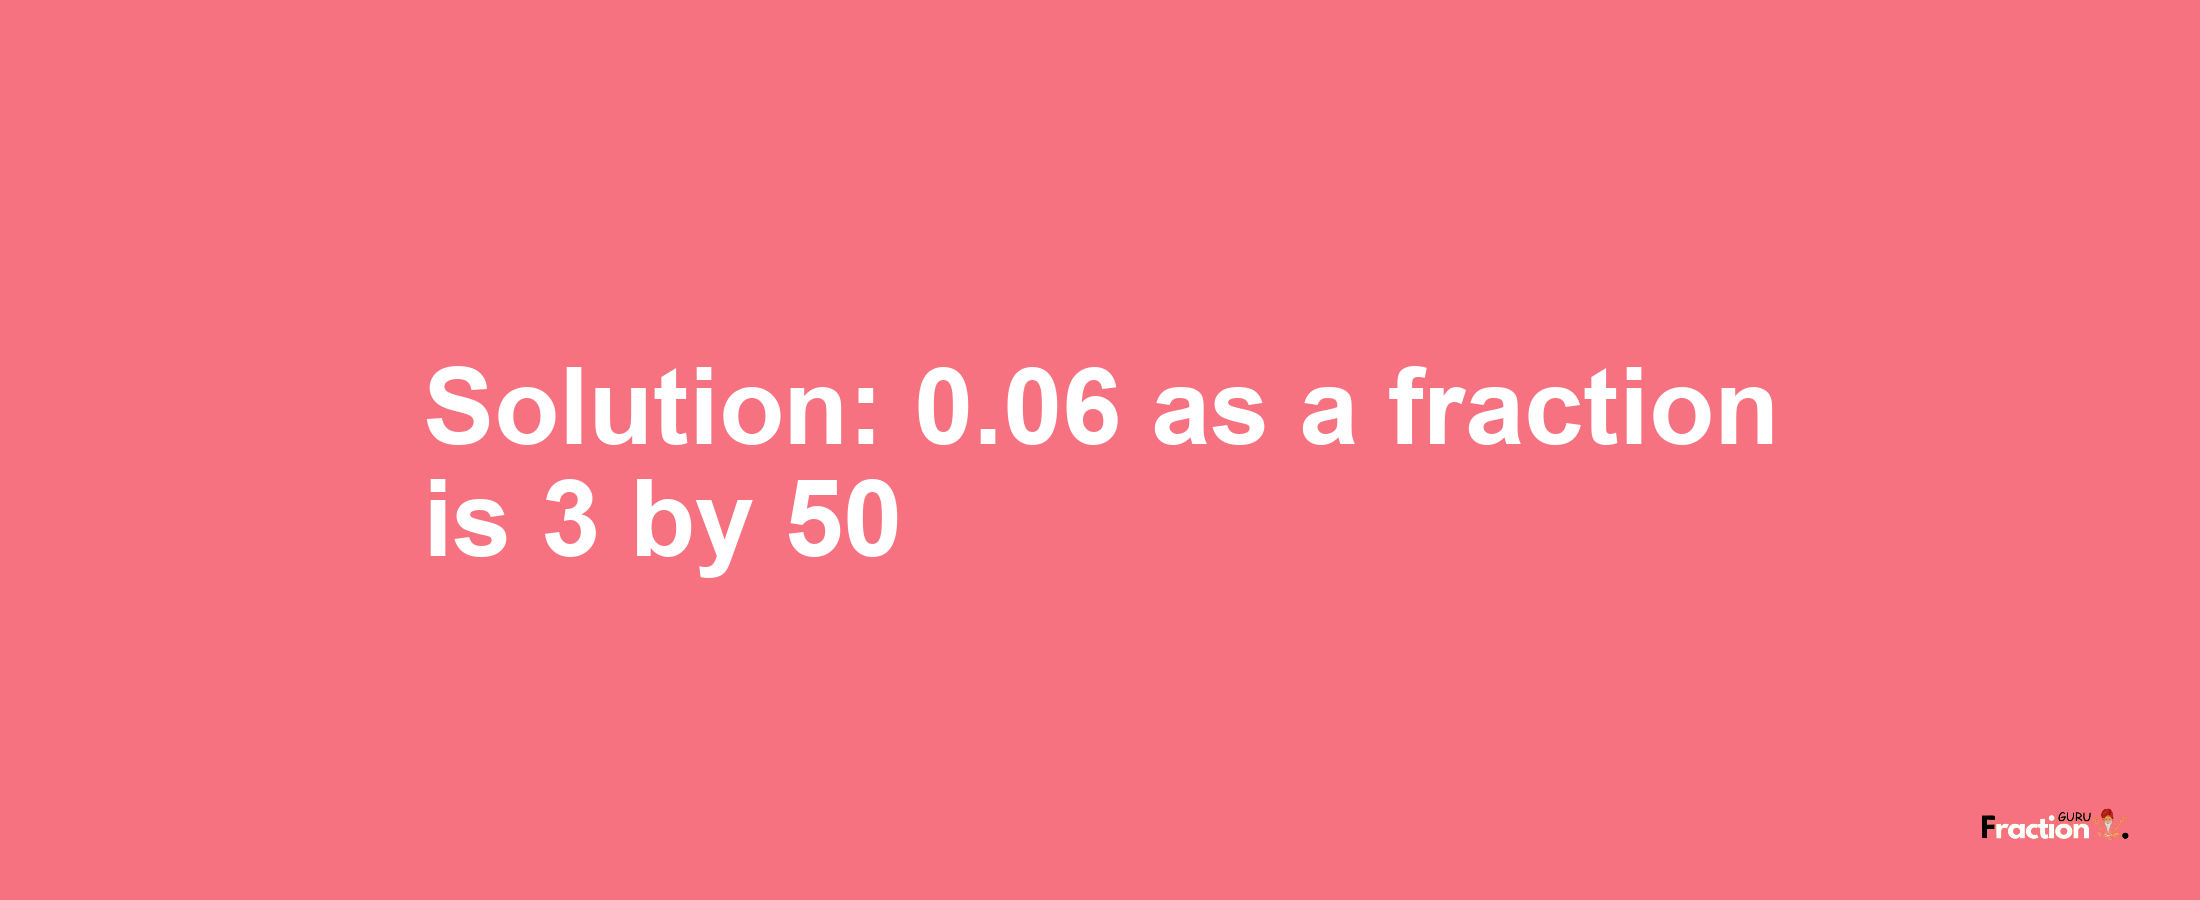 Solution:0.06 as a fraction is 3/50